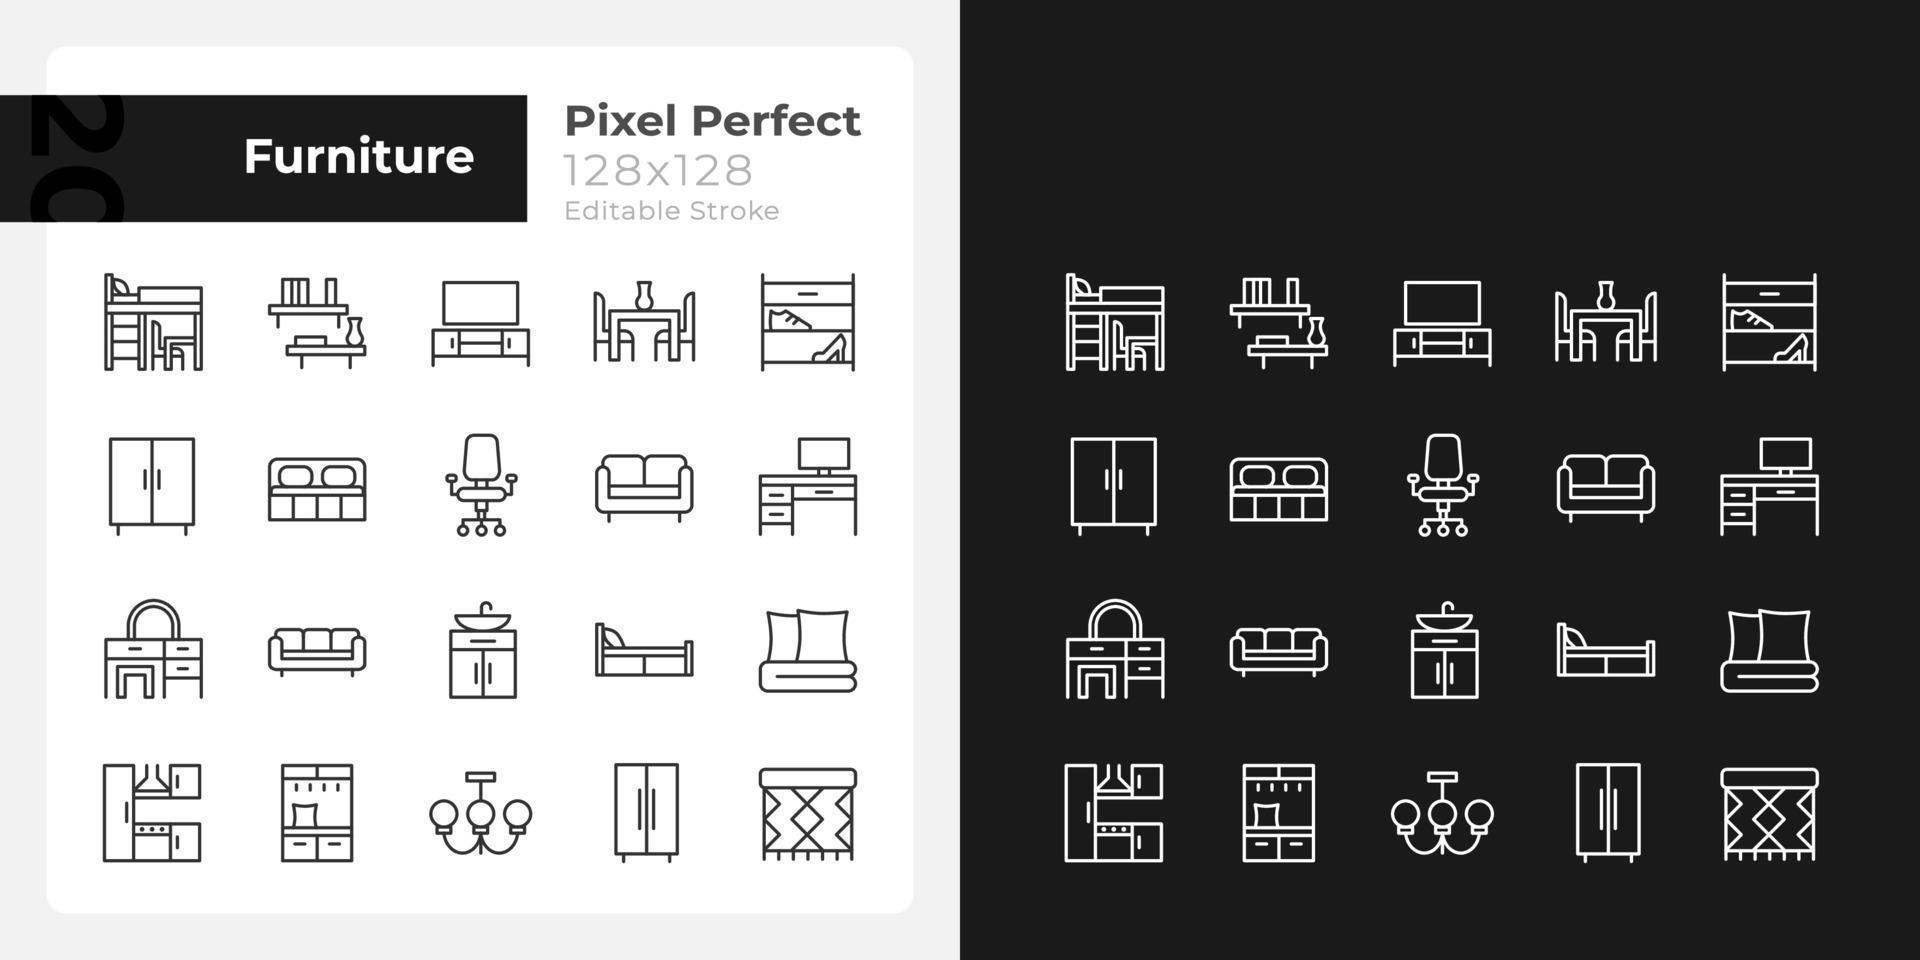 Furniture department pixel perfect linear icons set for dark, light mode. Furnishing for living room, bedroom. Homeware. Thin line symbols for night, day theme. Isolated illustrations. Editable stroke vector